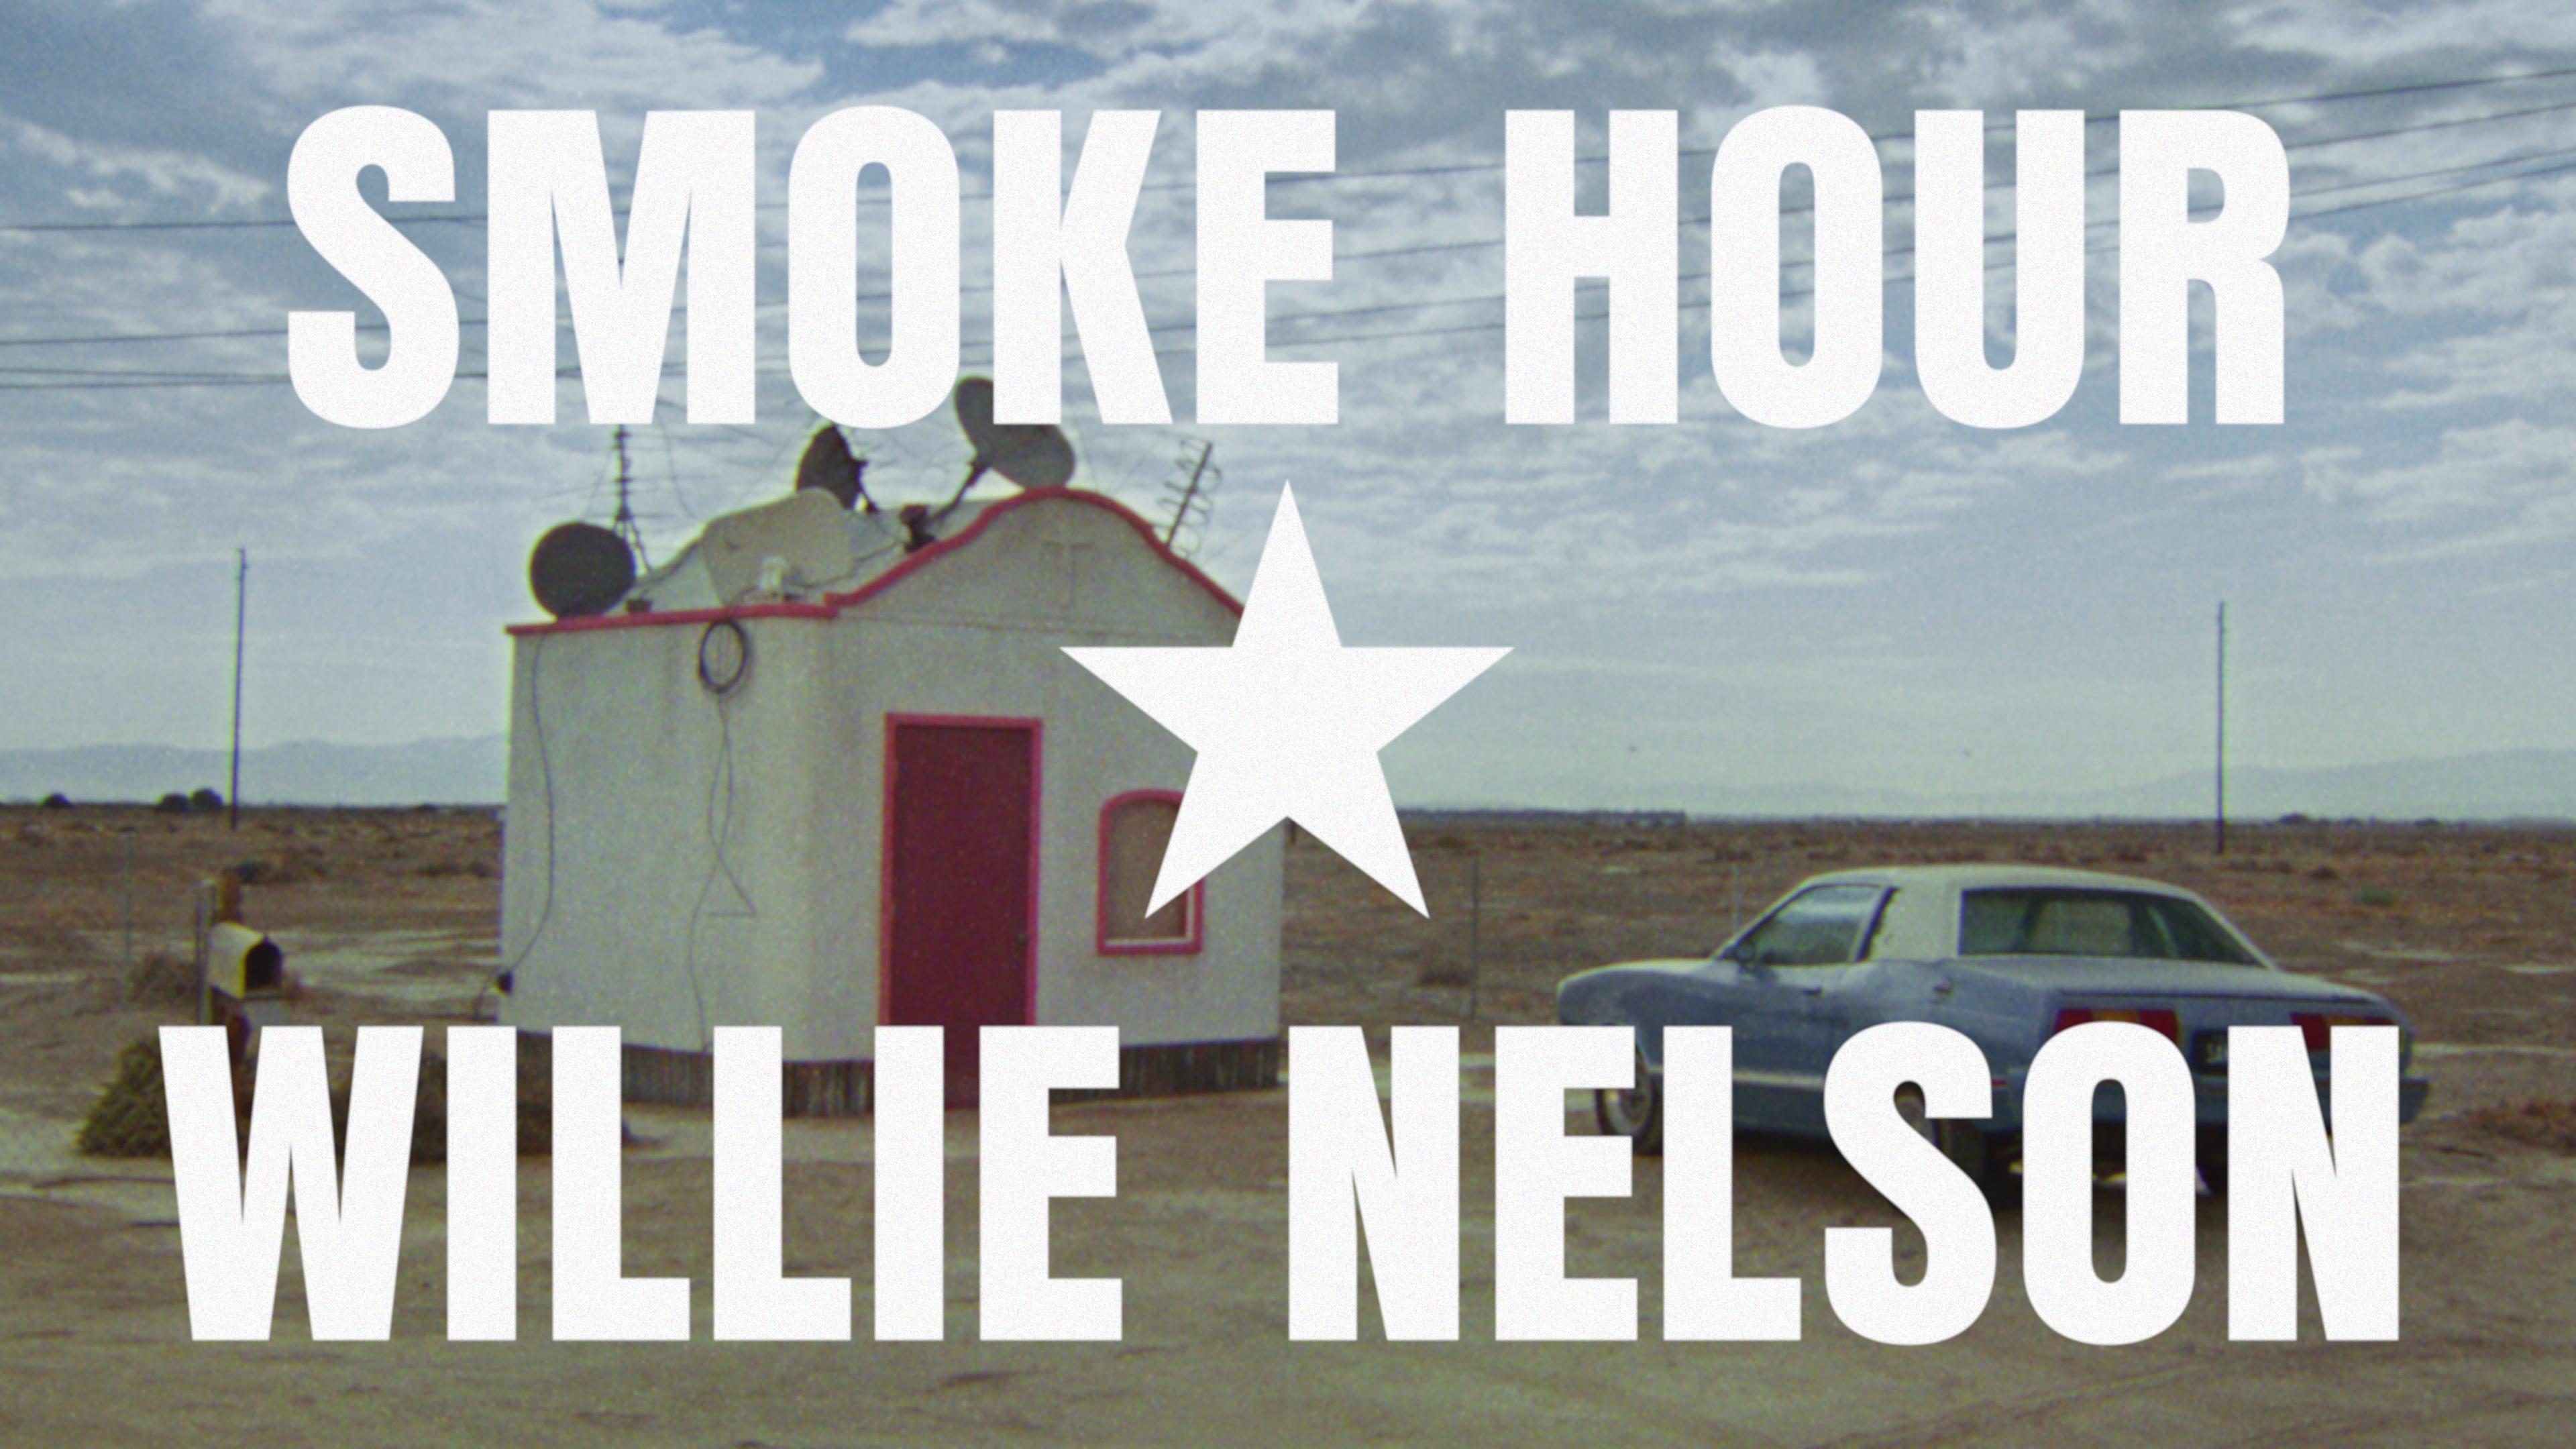 Beyoncé - SMOKE HOUR ★ WILLIE NELSON (Official Lyric Video)